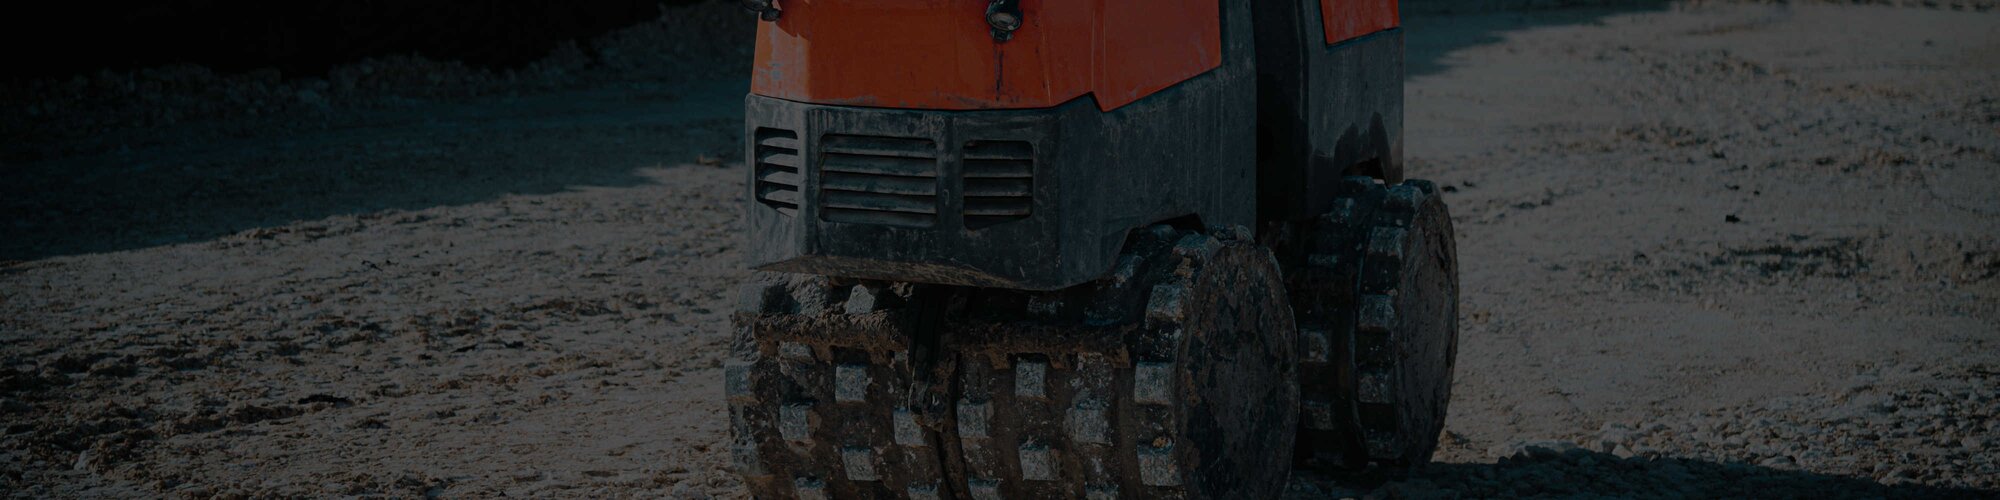 An orange trench roller with sheepsfoot drums moving across dirt.